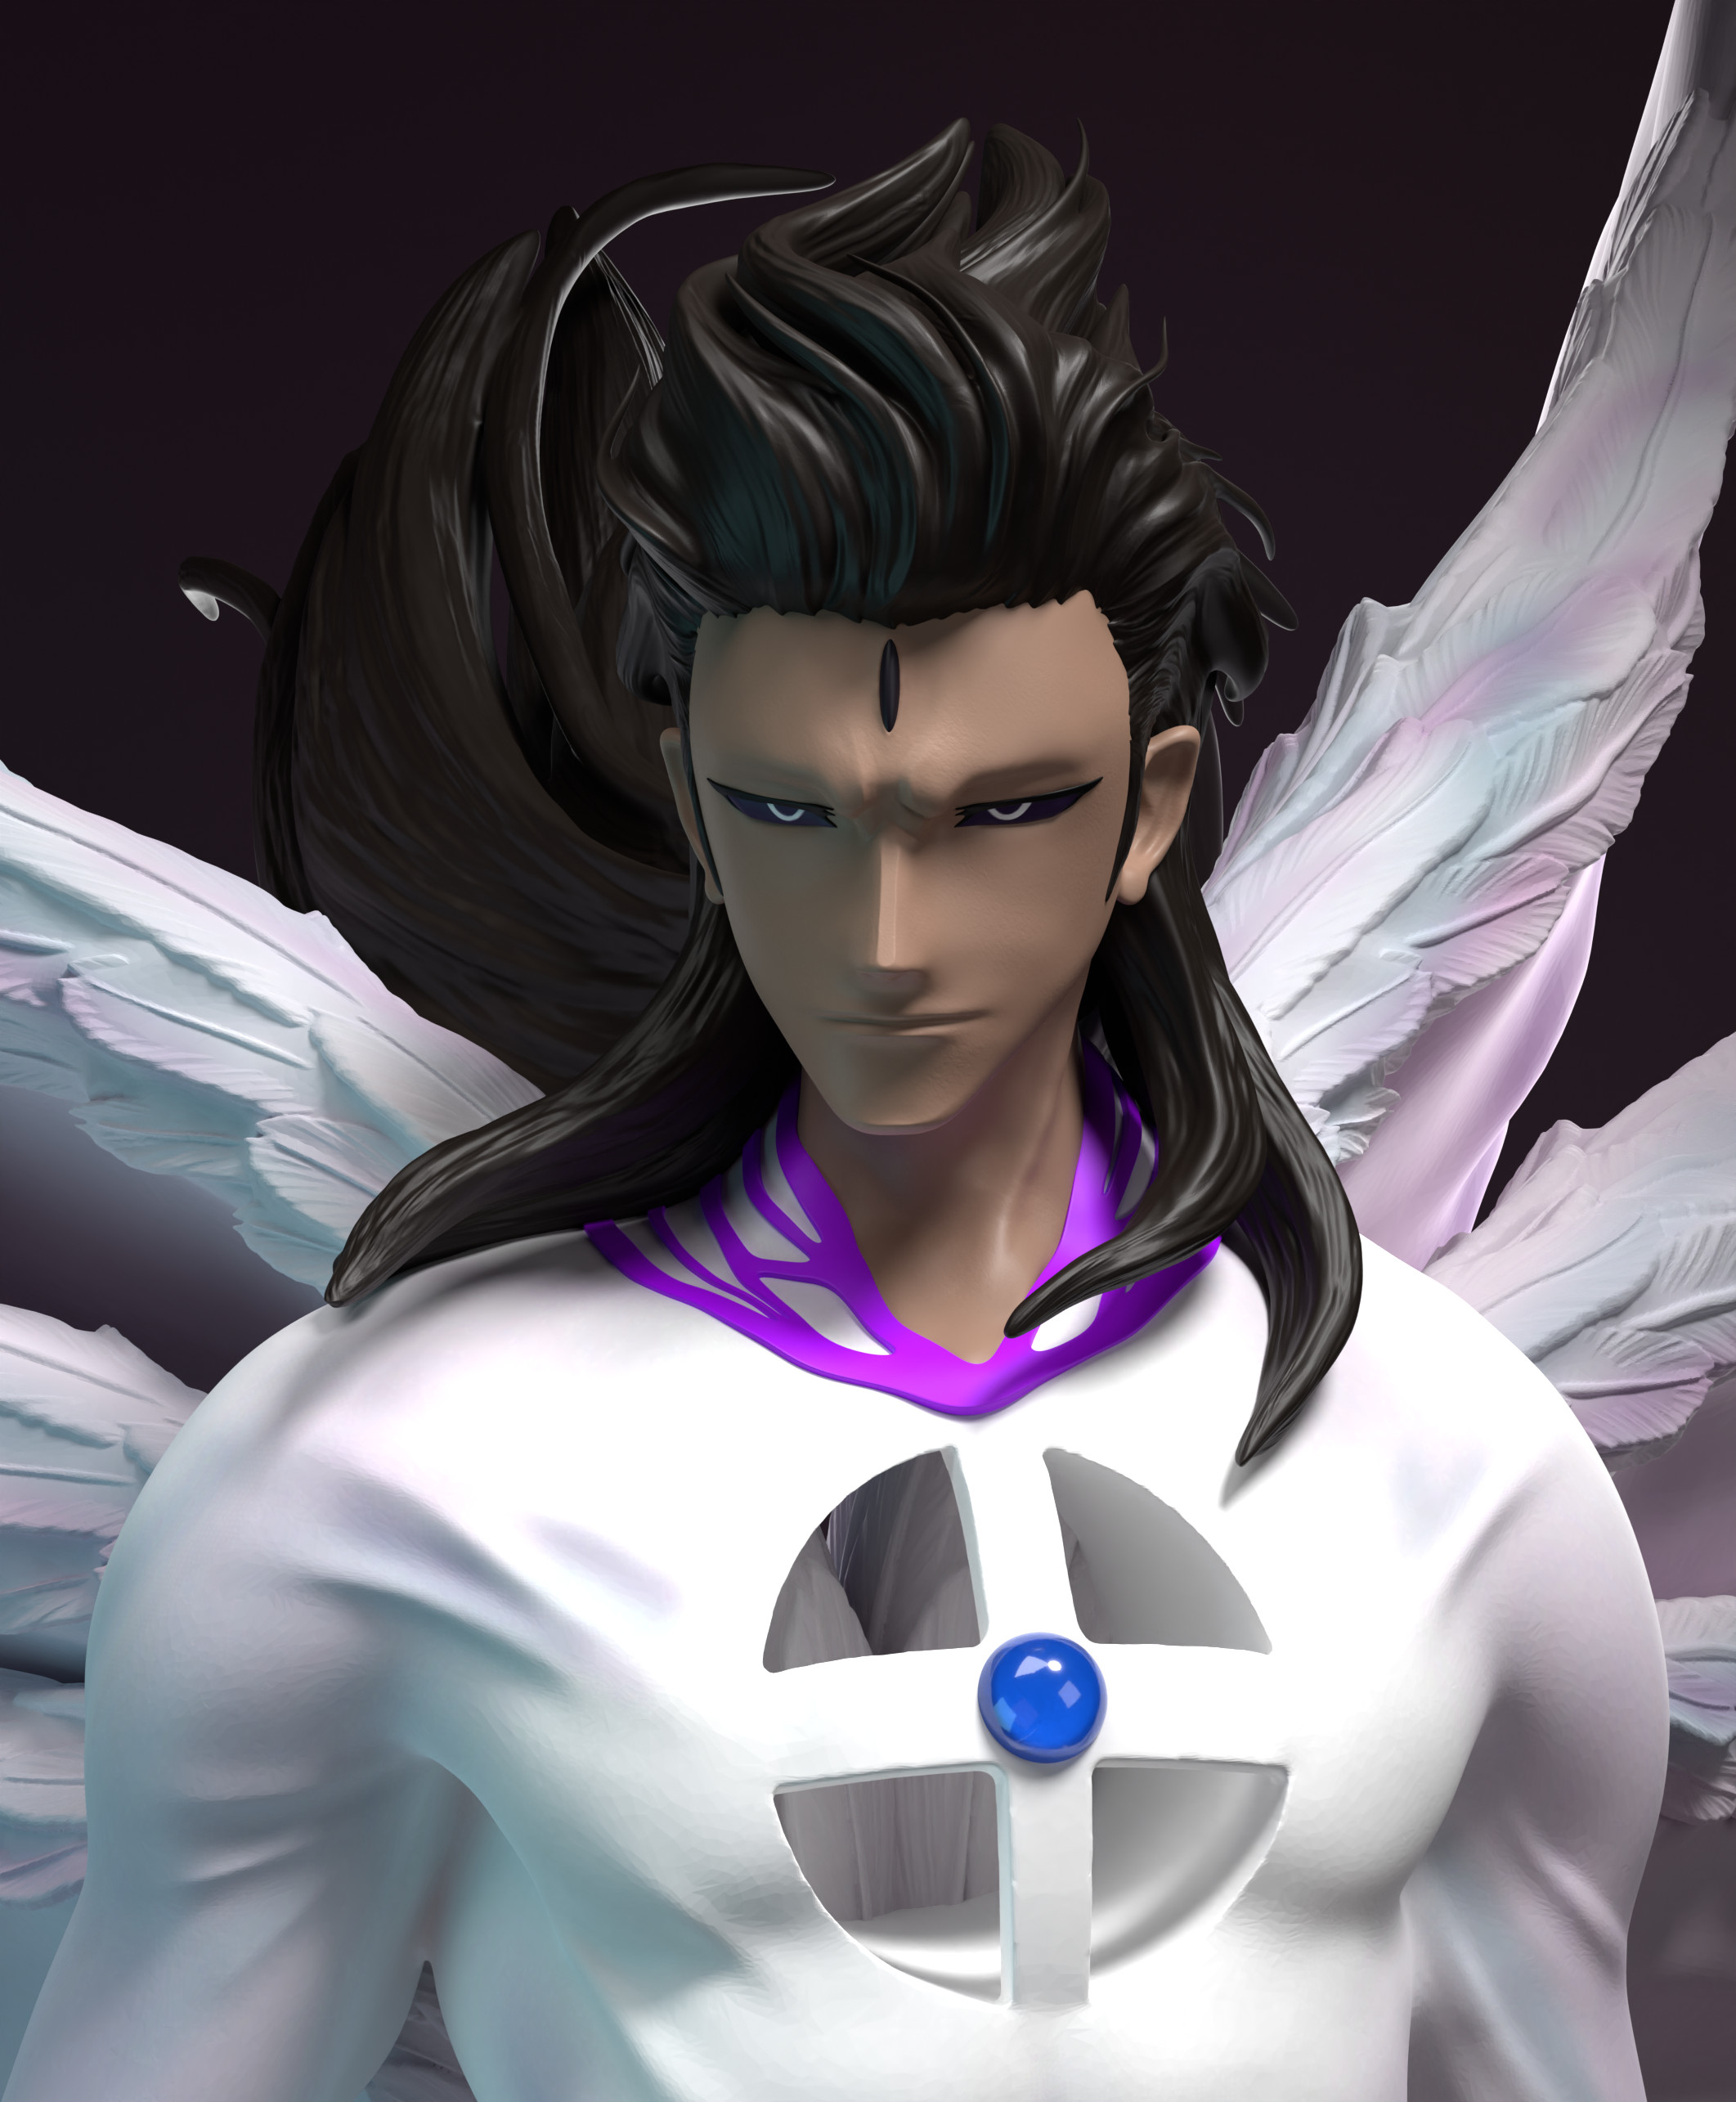 AIZEN ALL FORM SHOWCASE WITH MAX LEVEL IN ANIME ADVENTURES! 